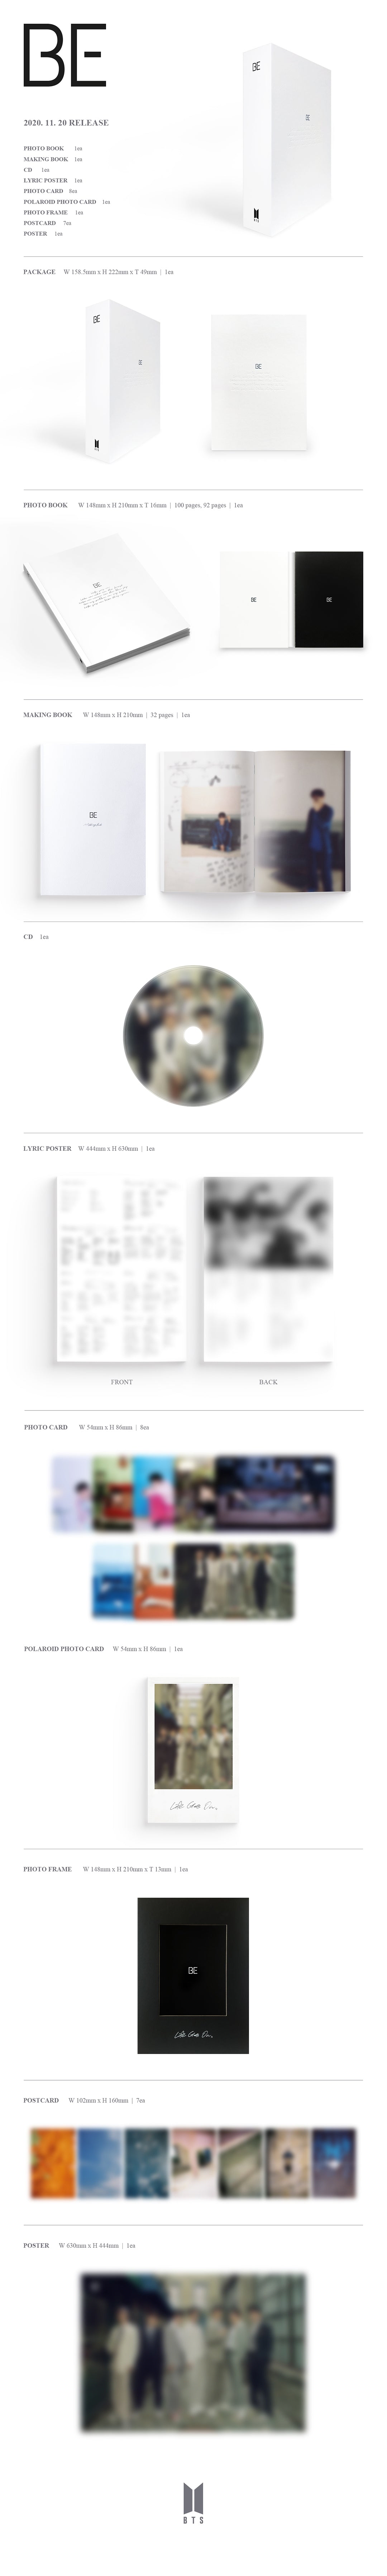 BTS BE Album Deluxe Edition Life goes on  Component Photo Book, Making Book, CD, Lyric Poster, Photo Card, Polaroid Photo Card, Photo Frame, Postcard, Poster  Size 230 x 302(mm)  Country Of Origin Republic Of Korea